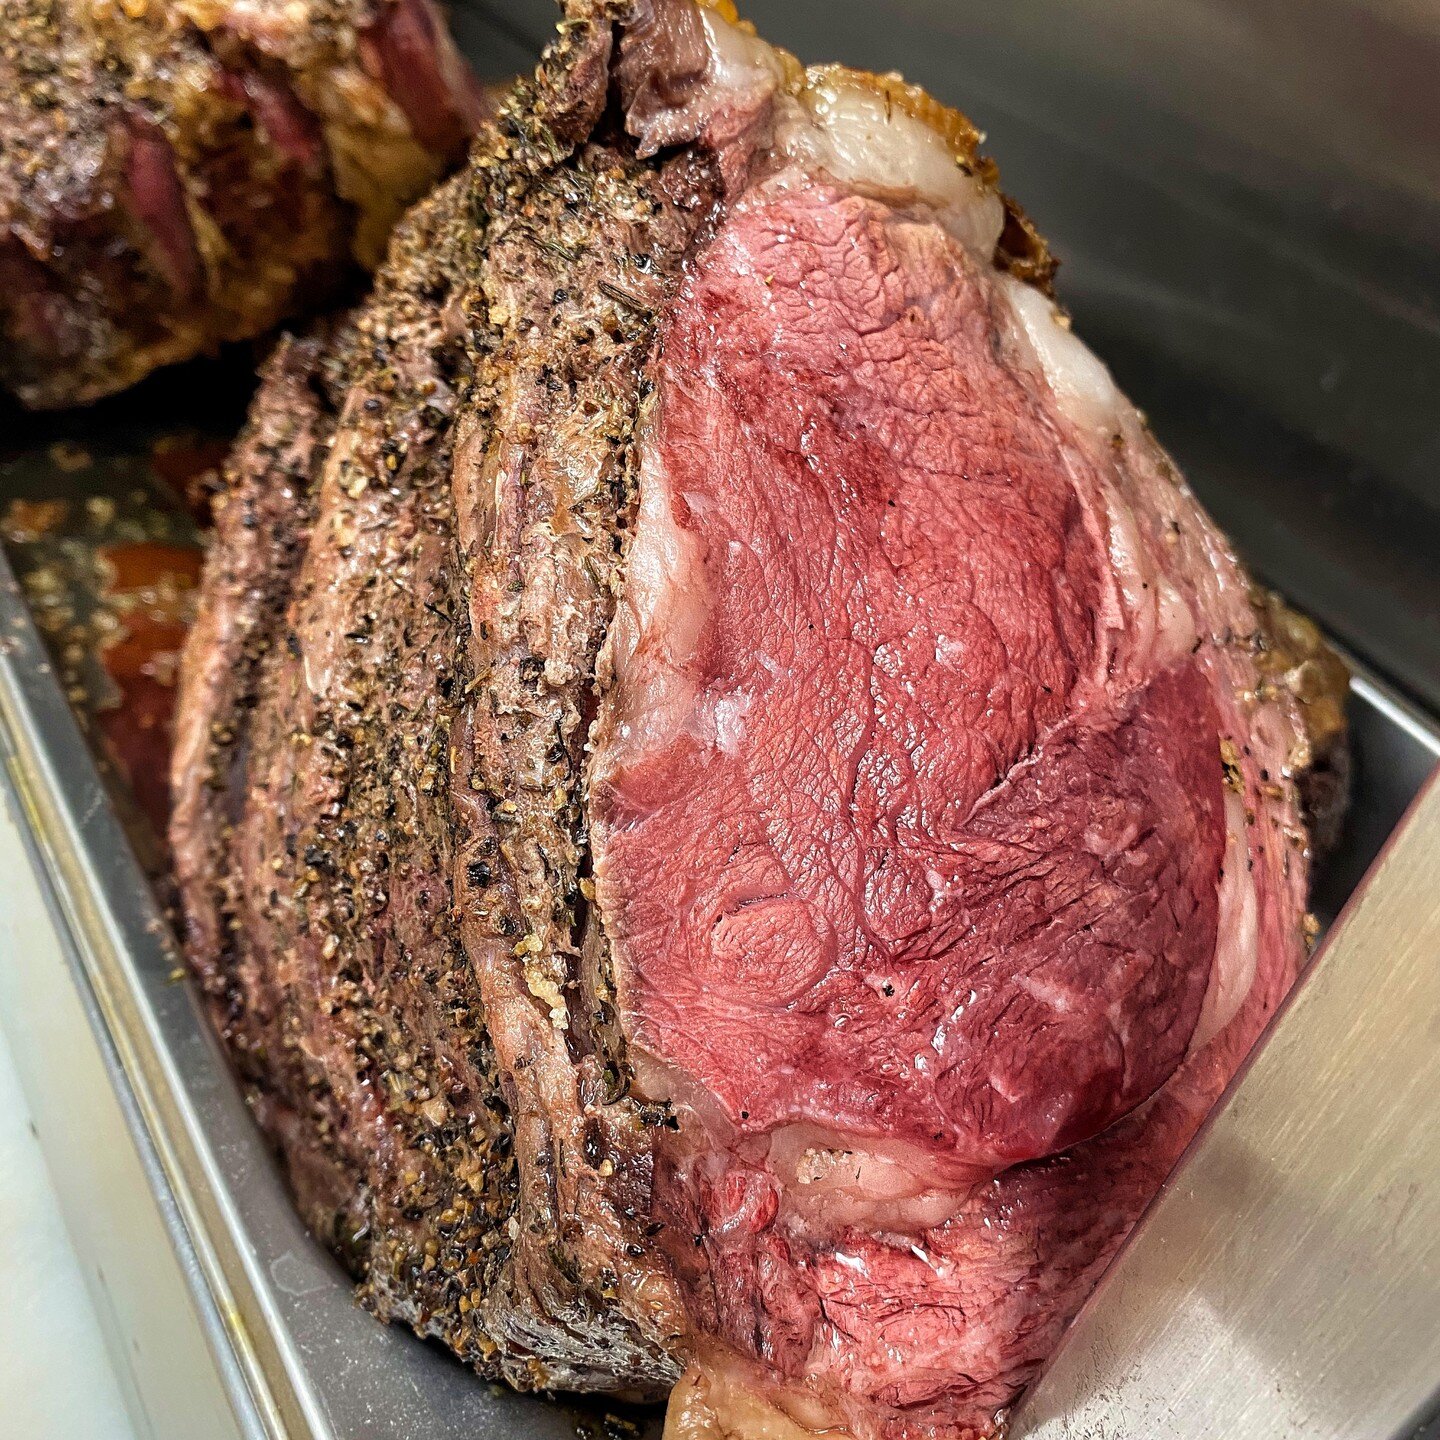 Friday Night is Prime Rib Night @ The Hangout!! 🥩🍽️😜 #primeribfriday

Enjoy Hand-Crafted Drinks and Delicious Food with Your Favorite Hangout Crew!!

🔗 Order now. Link in bio.
📍901 Ocean Ave, Seal Beach, CA 90740⁣⁣⁣⁣⁣⁣⁣⁣⁣⁣⁣⁣⁣⁣⁣⁣⁣⁣⁣⁣⁣⁣
📍16490 Bo